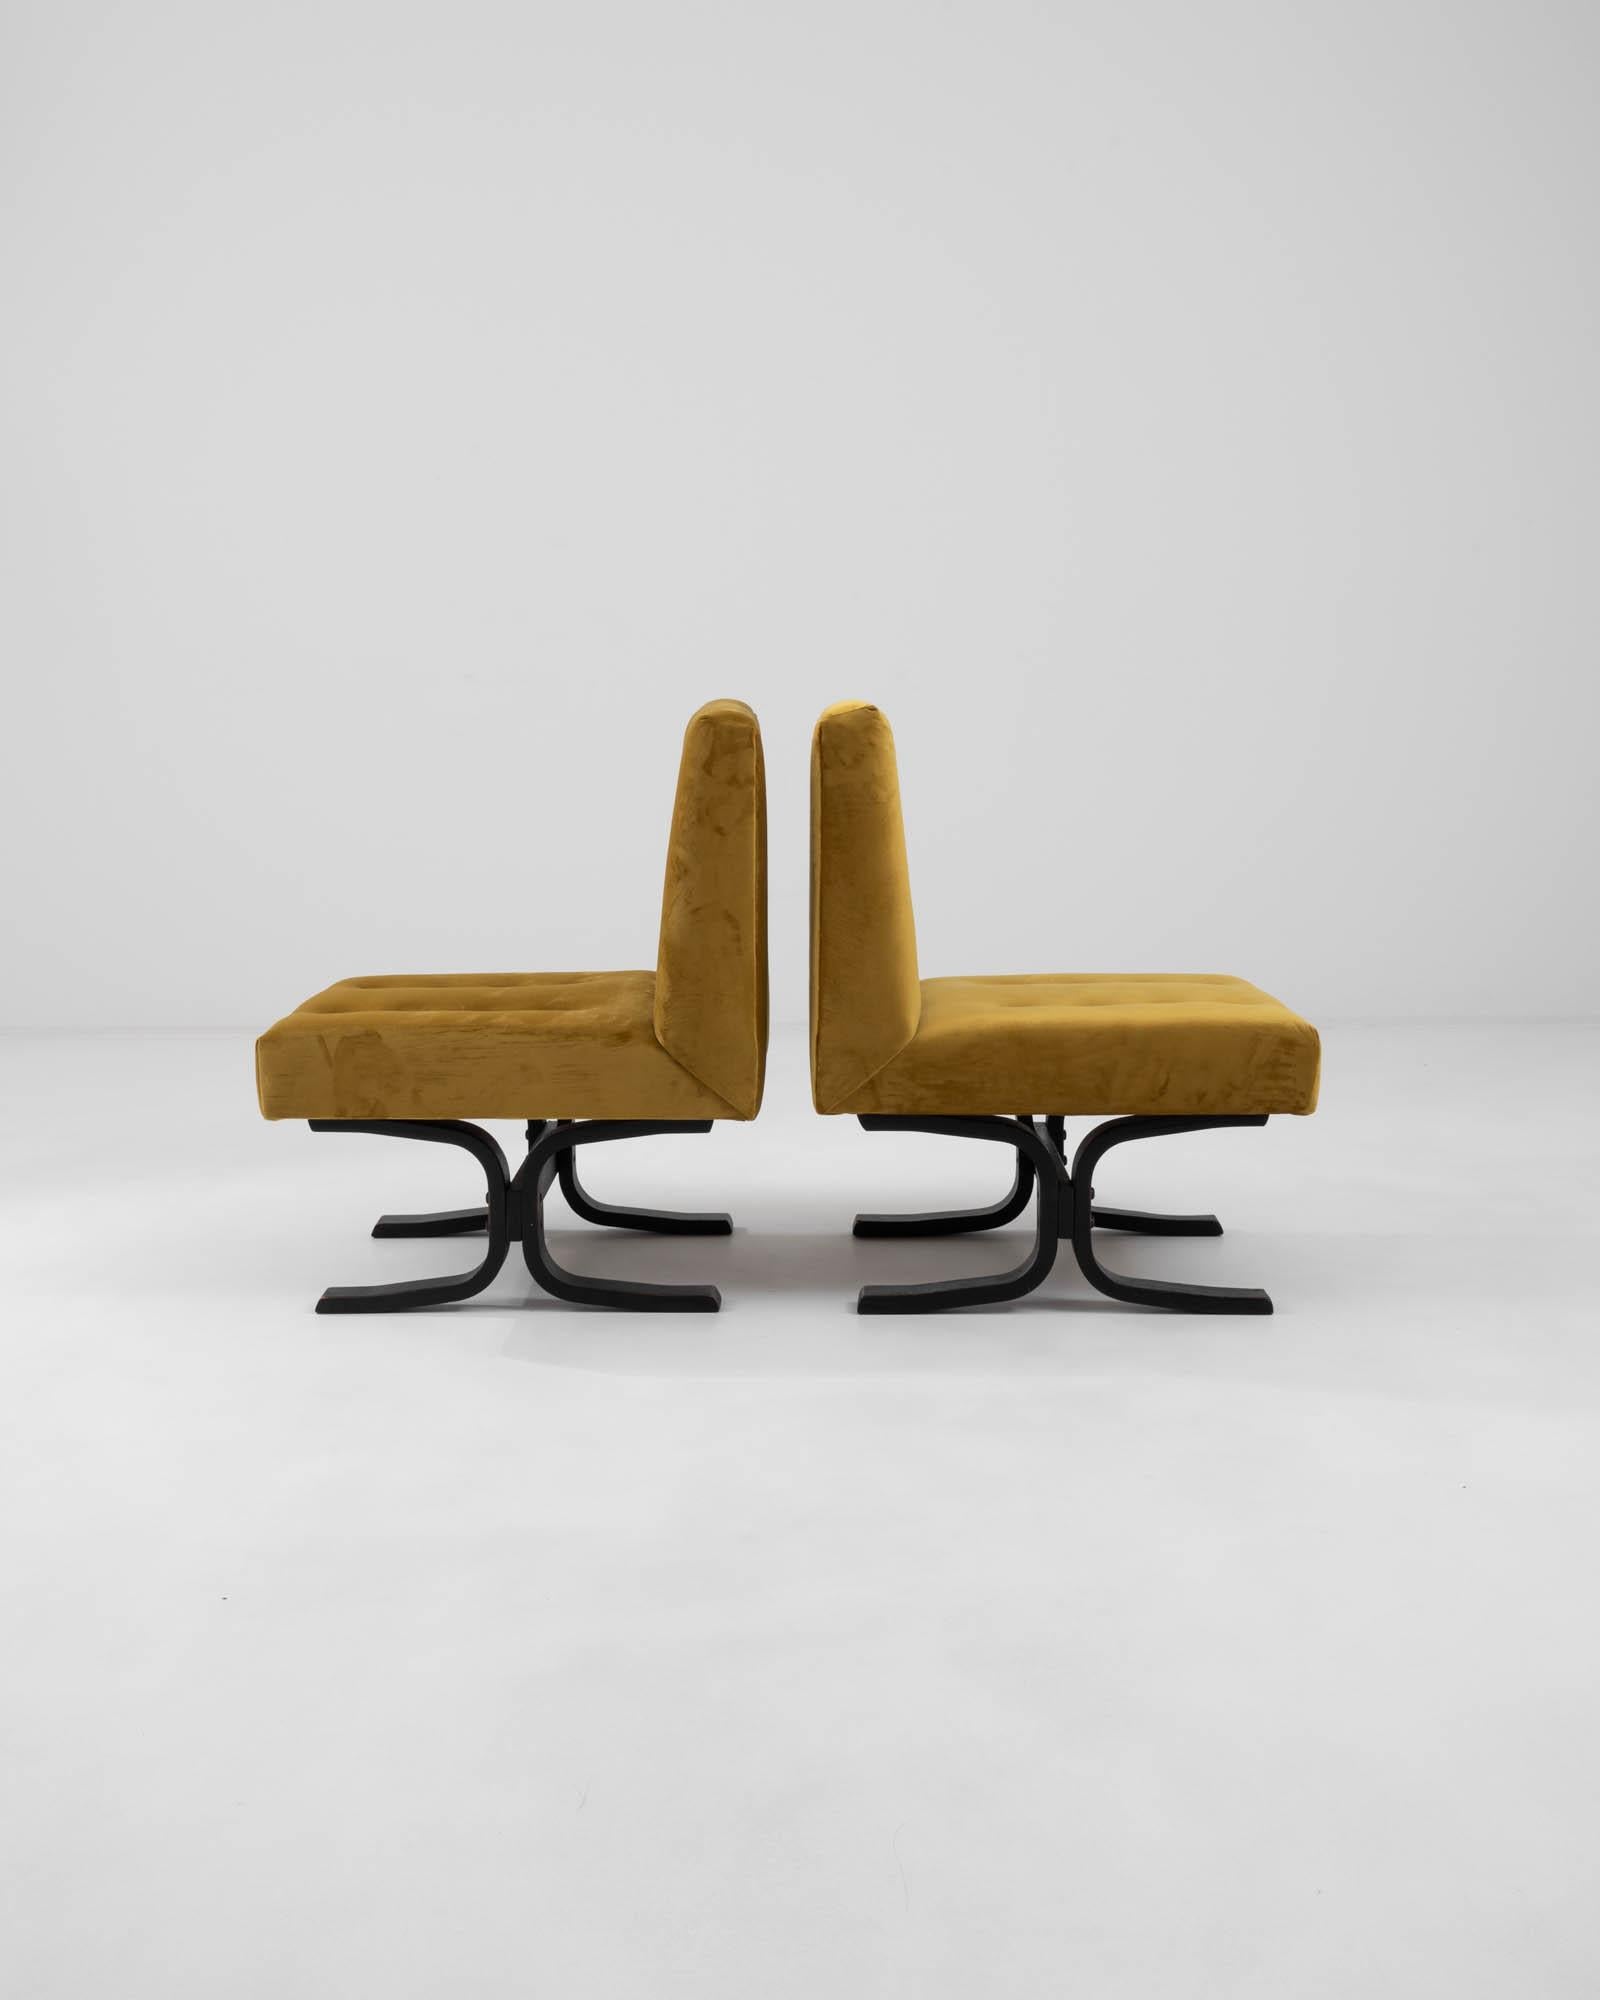 Upholstery 1960 Czechia Upholstered Chairs by Ludvik Volak, Set of 2 For Sale